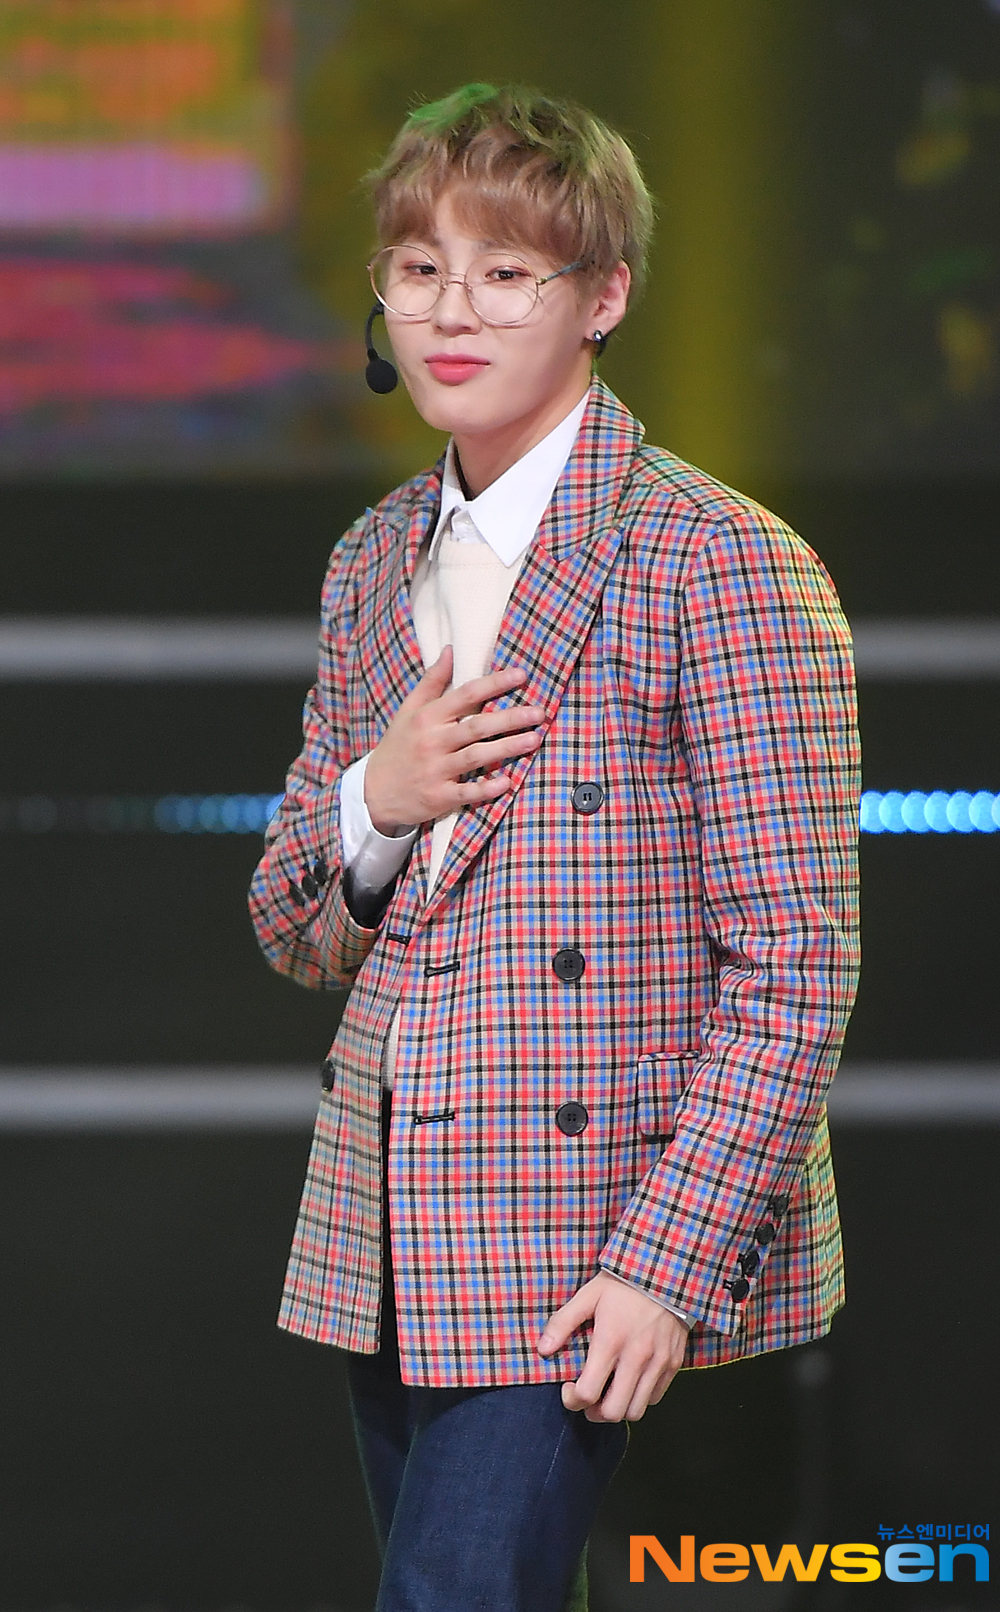 Singer Ha Sung-woon is performing on MBC Music live broadcast Show Champion held at MBC Dream Center in Ilsan, Janghang-dong, Ilsan-dong, Goyang-si, Gyeonggi-do on the afternoon of March 13th.Meanwhile, Show Champion featured Jang Dong-woo, Ravi, (girl) children, Ha Sung-woon, Woosuk X Guarin, TOMORROW X TOGETHER, Hong Jin-young, SF9, On-and-Off, Girl of the Month, Ha Eun-Josep, Train to Fall, Trey and Dreamnote.expressiveness